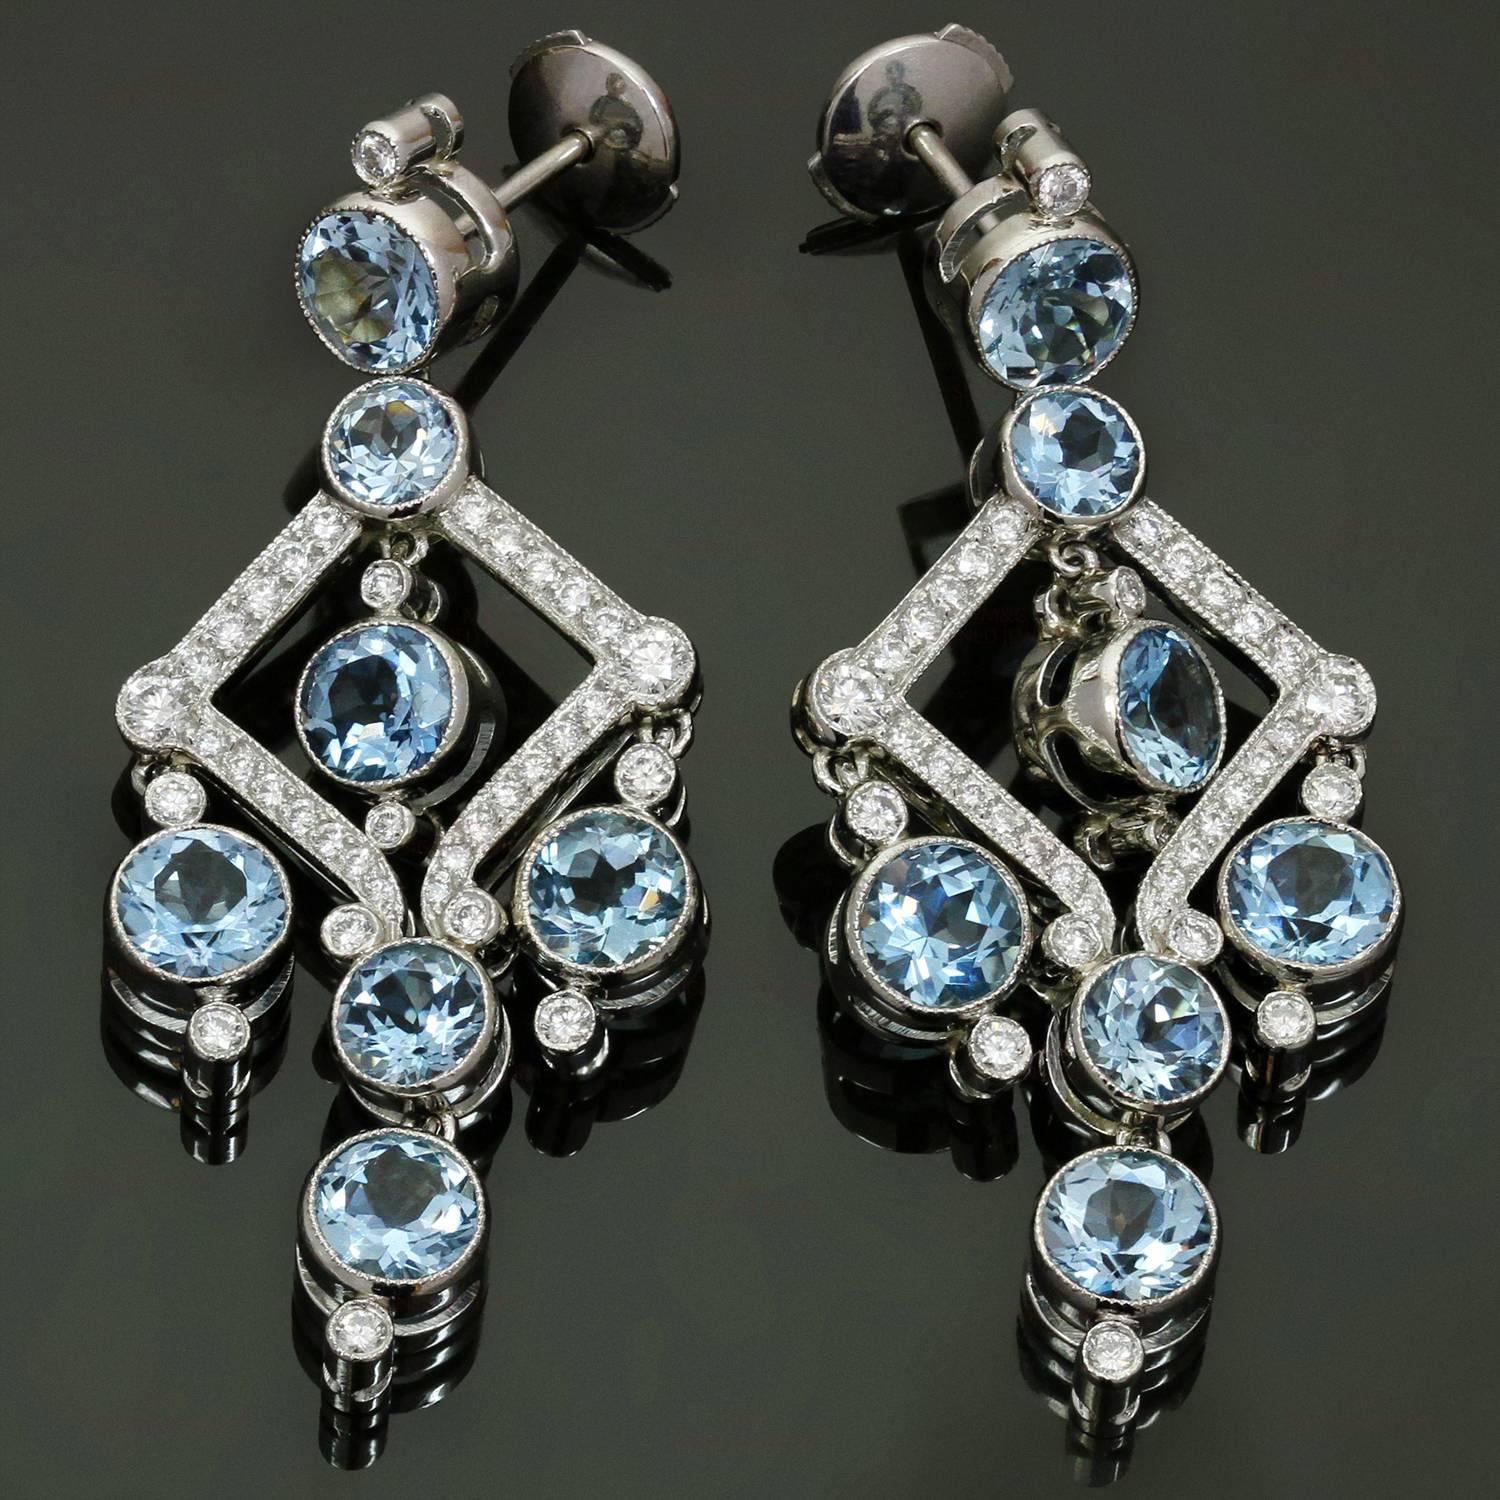 These magnificent Tiffany earrings are crafted in platinum and beautifully set with 14 round intense blue sparkling aqumarine stones measuring  4.0mm to 5.0mm and weighing an estimated 5.50 carats and 70 brilliant-cut round G/VS diamonds measuring